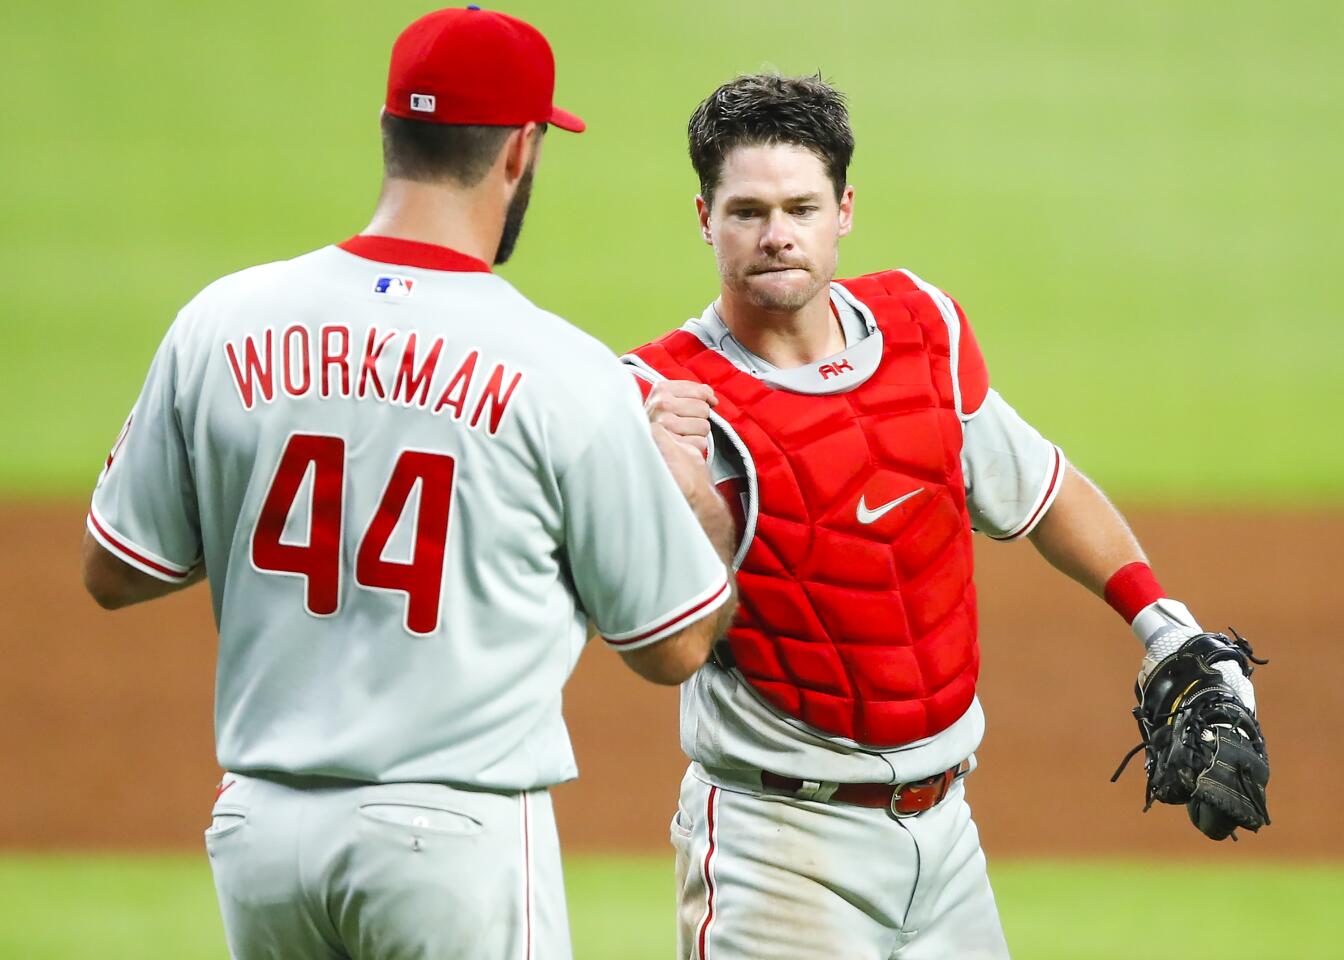 Brandon Workman blows save, takes loss in Phillies debut - The